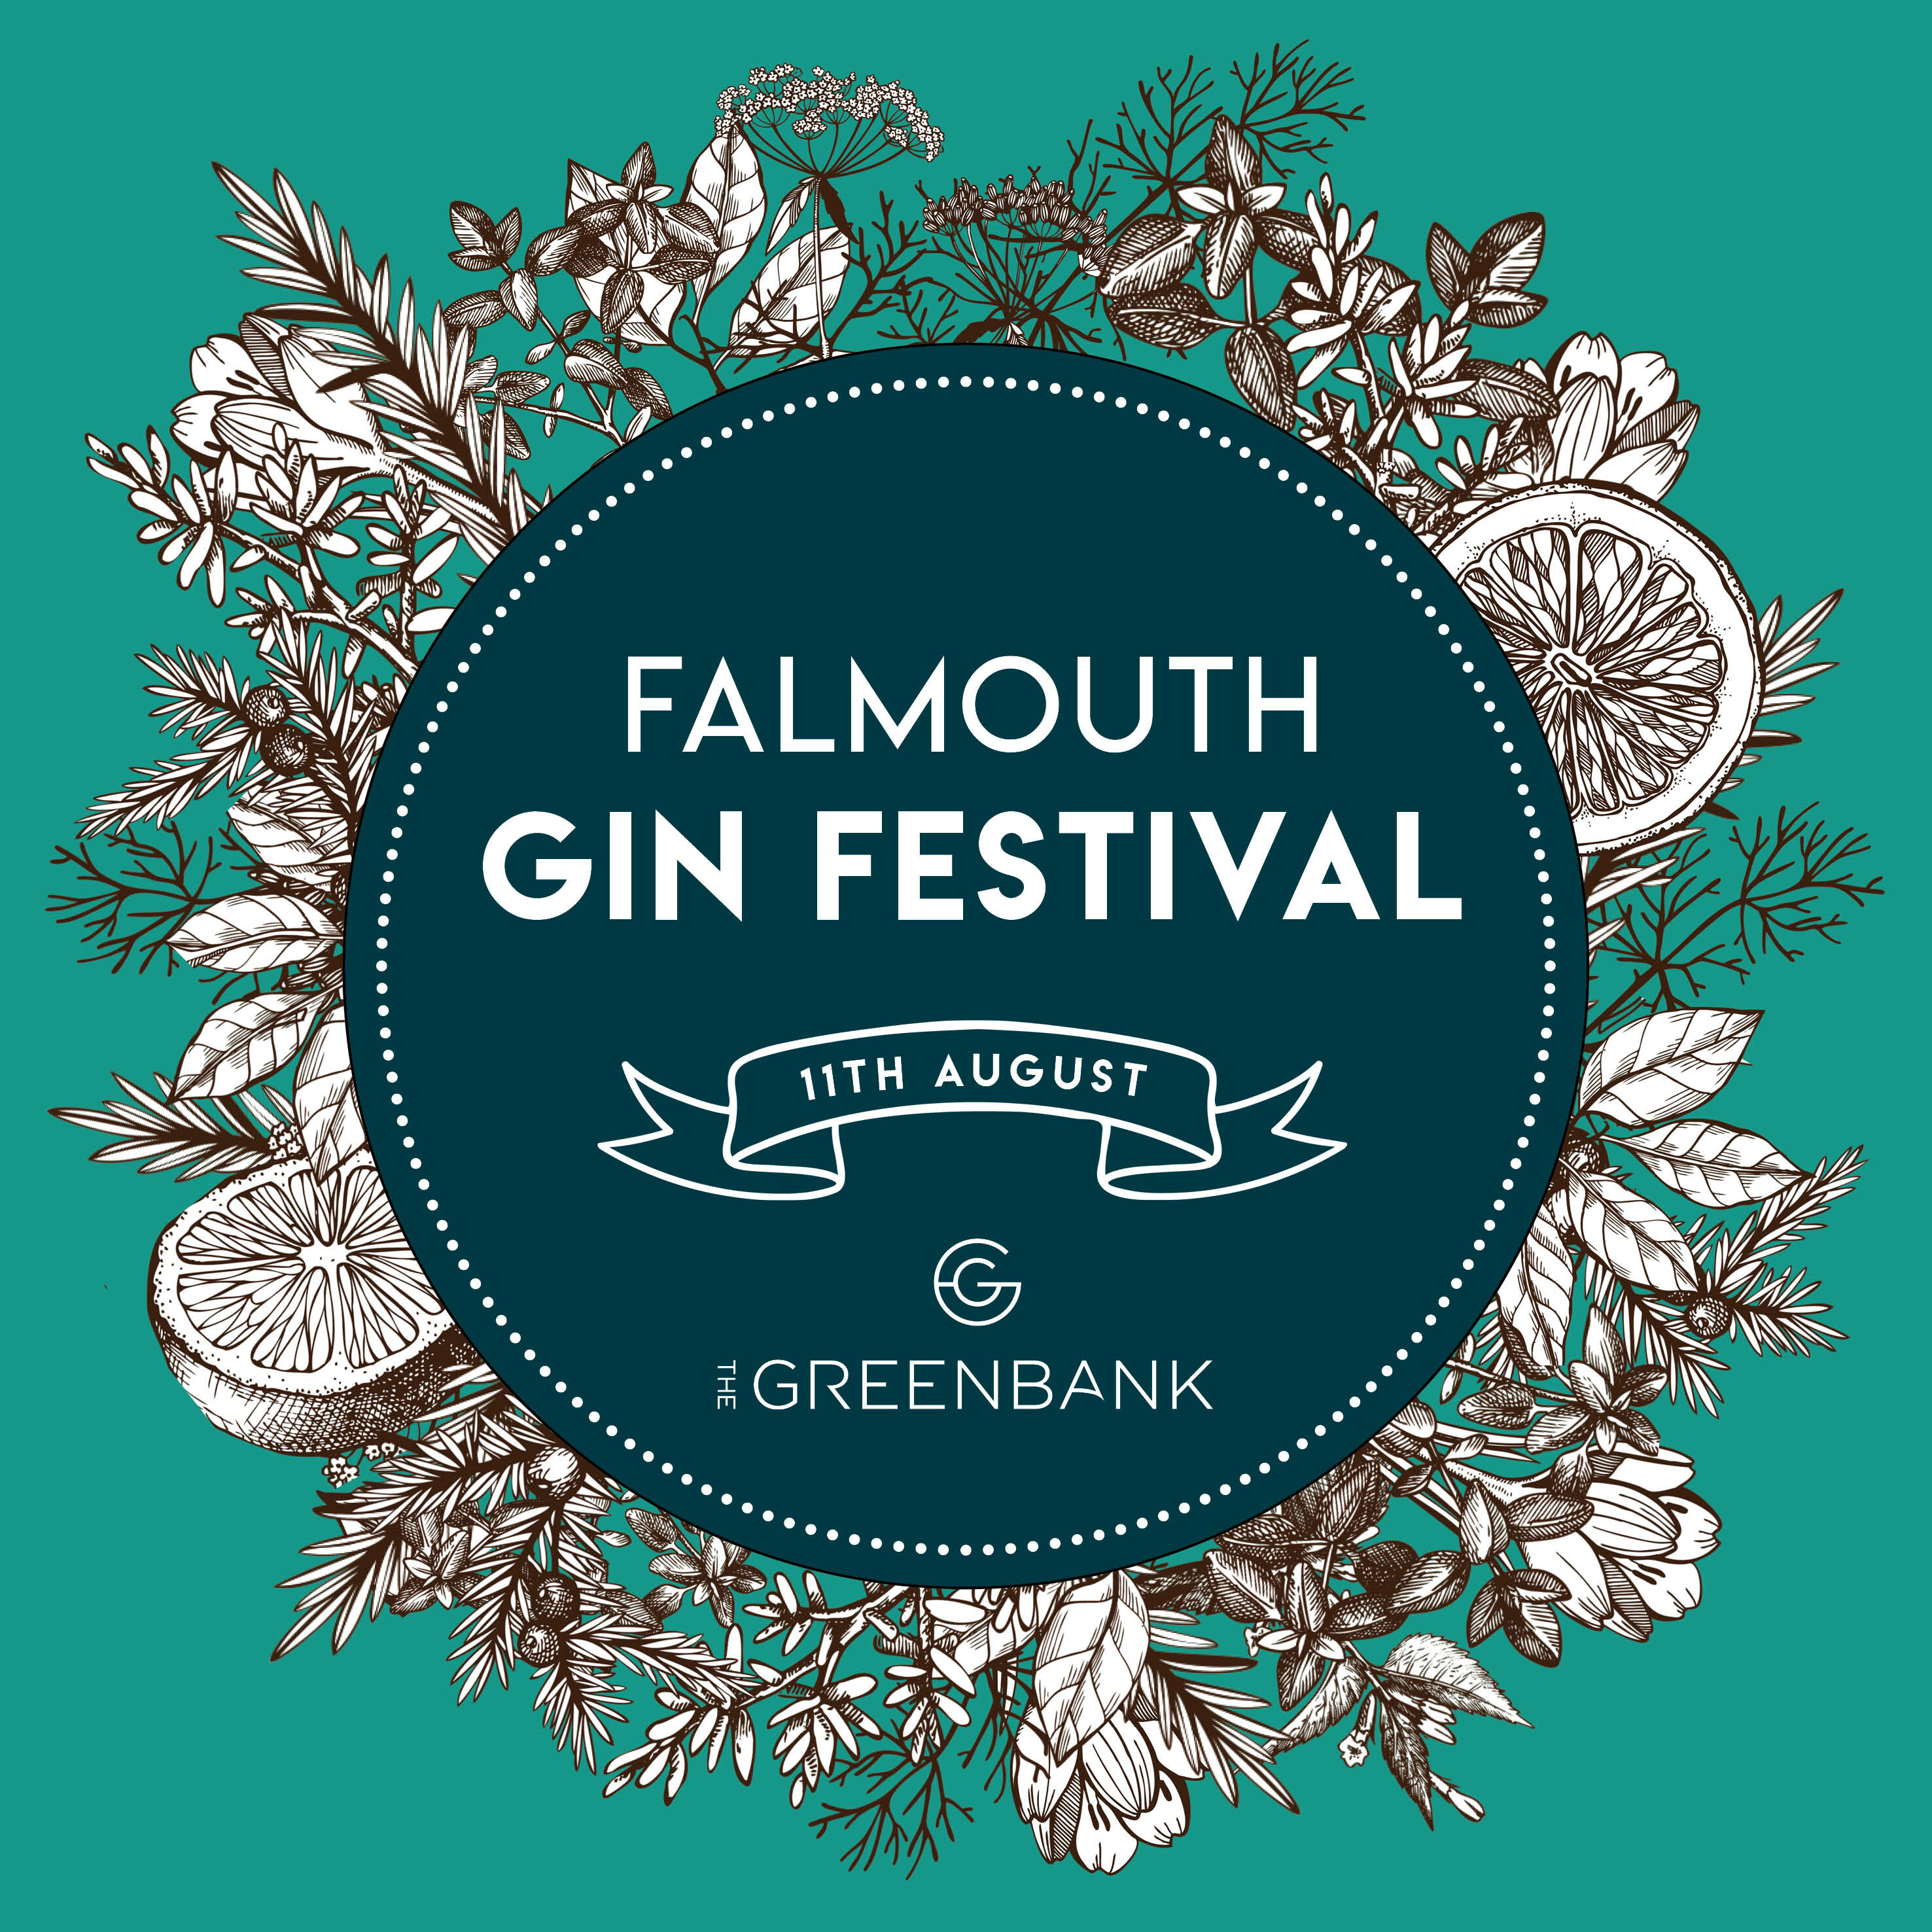 Falmouth’s first ever Gin Festival by The Greenbank Hotel